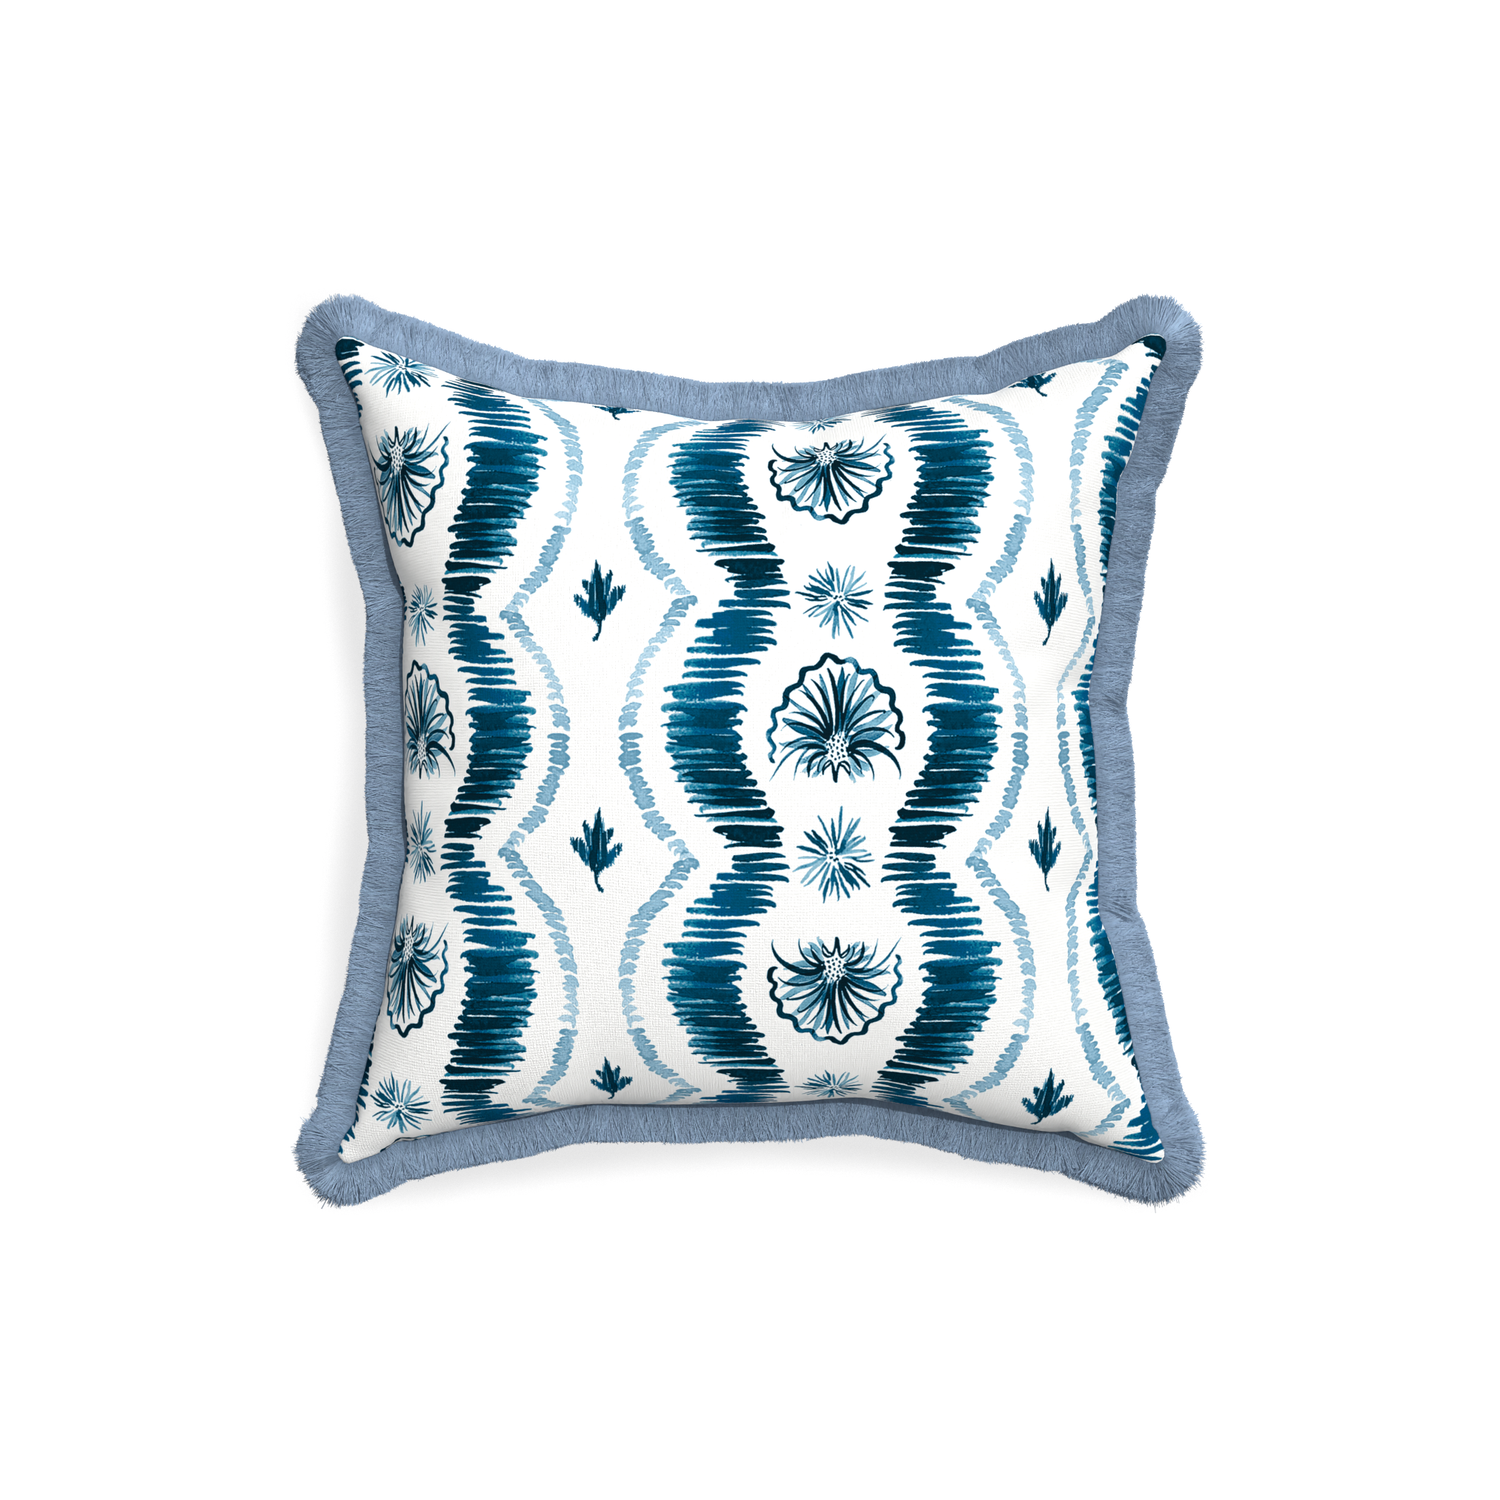 18 inch Square Blue Ikat Stripe Pillow with sky blue fringe